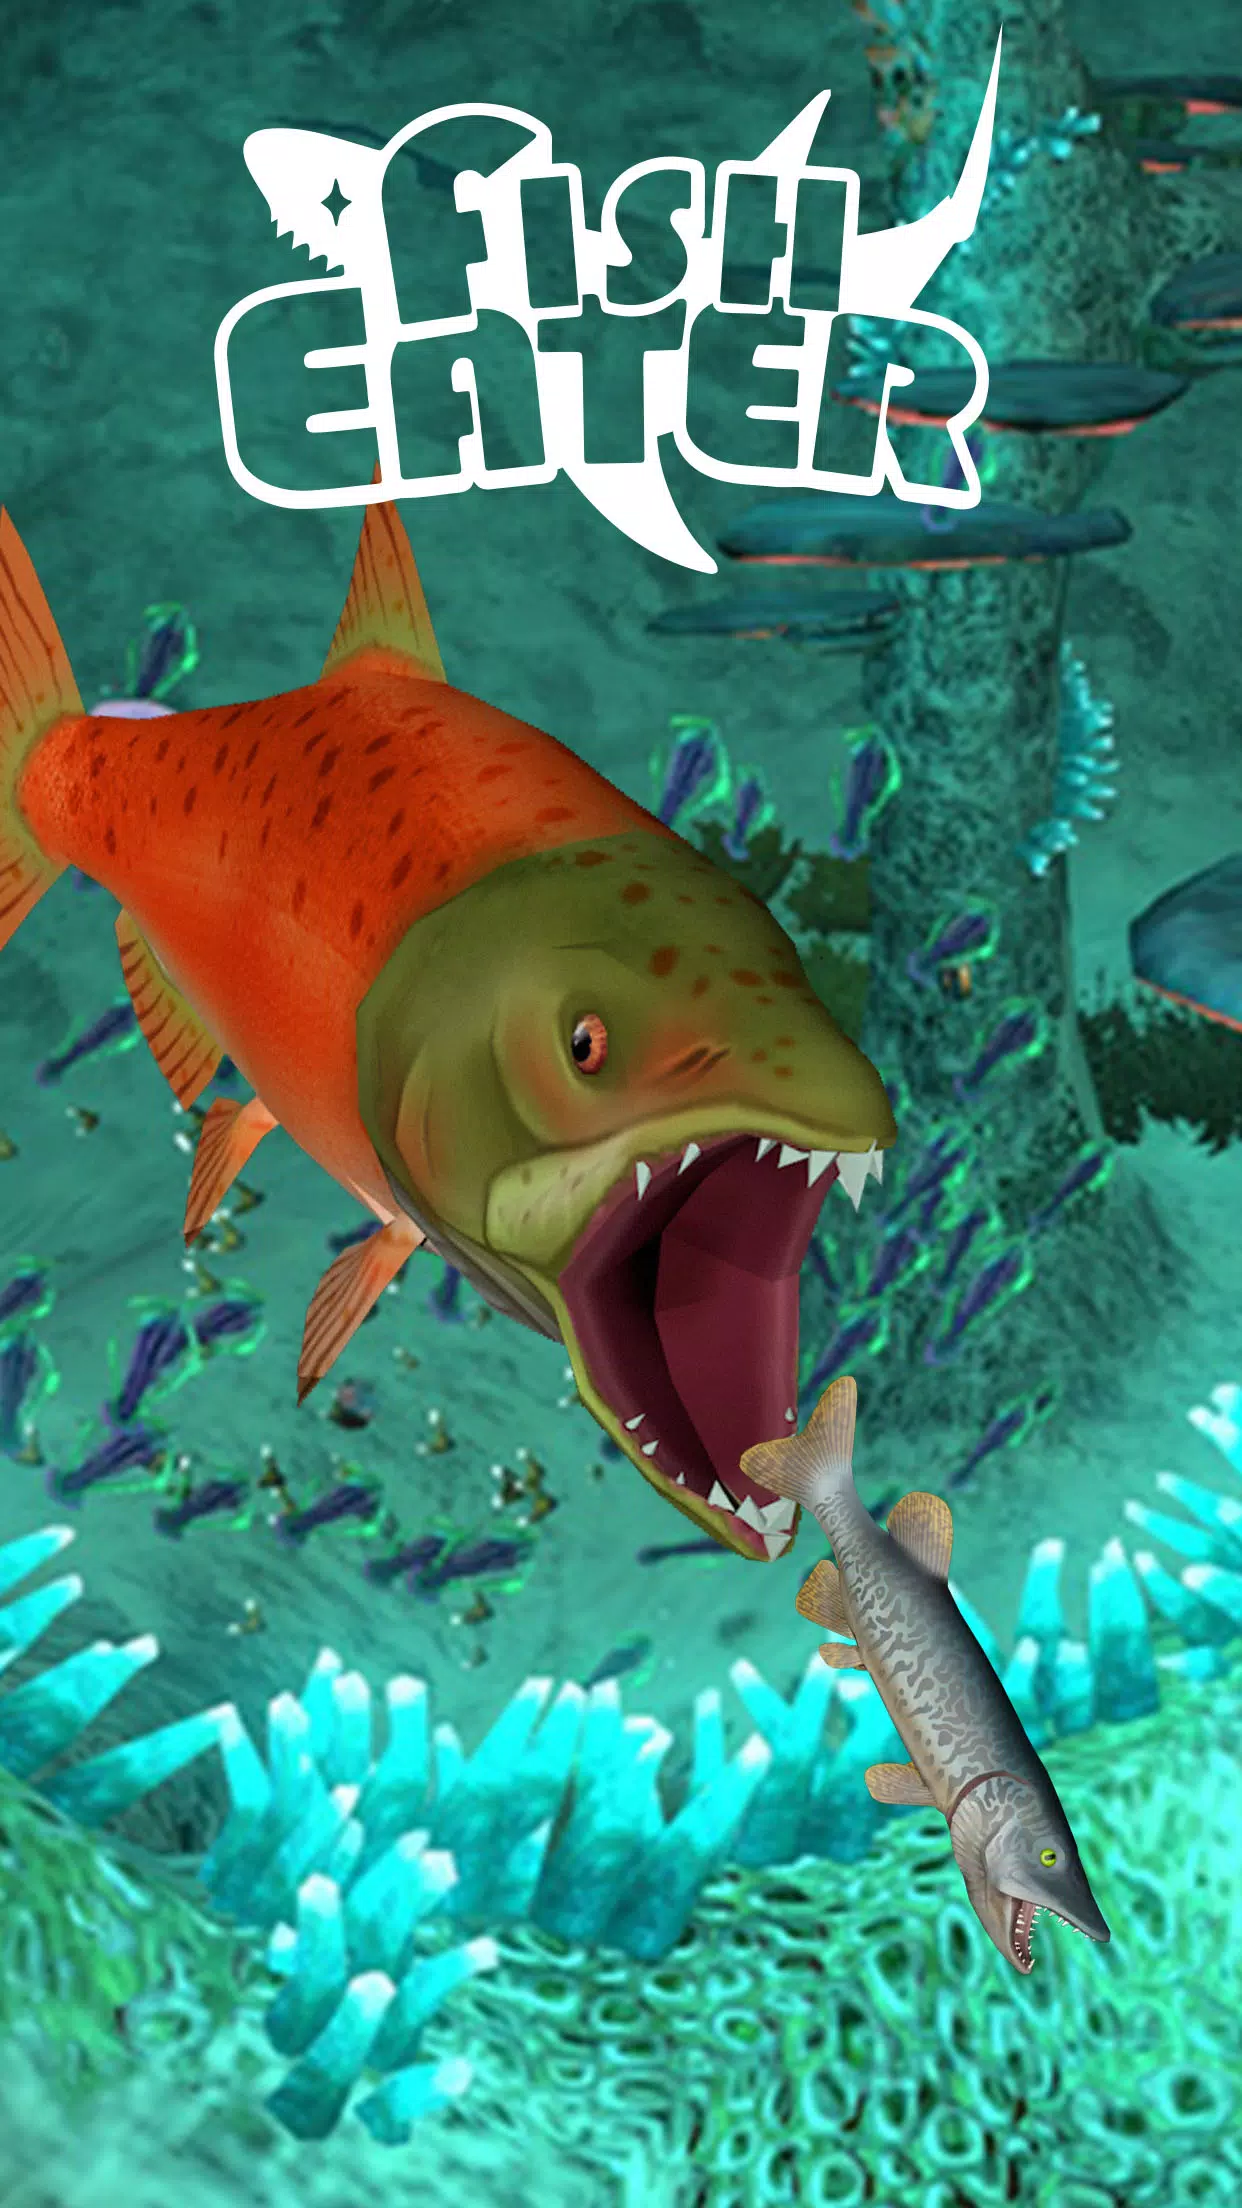 ORIGINAL! Game Feed And Grow Fish on Android OFFLINE Full Story